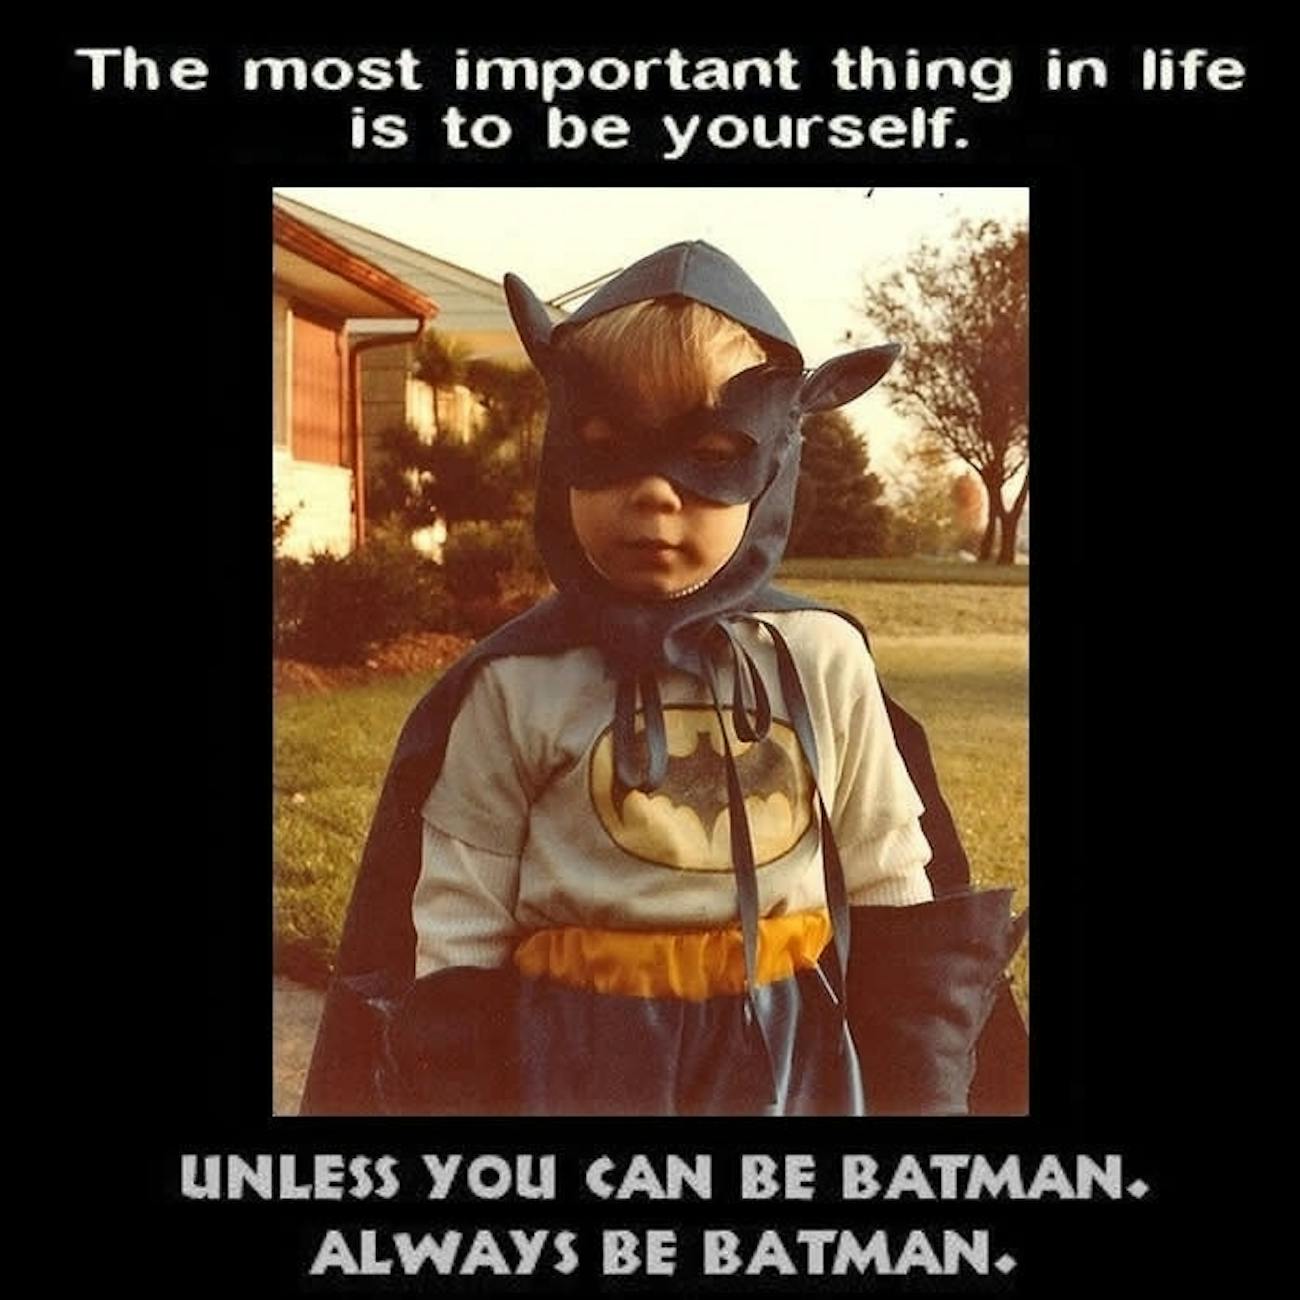 Image result for always be yourself unless you can be batman